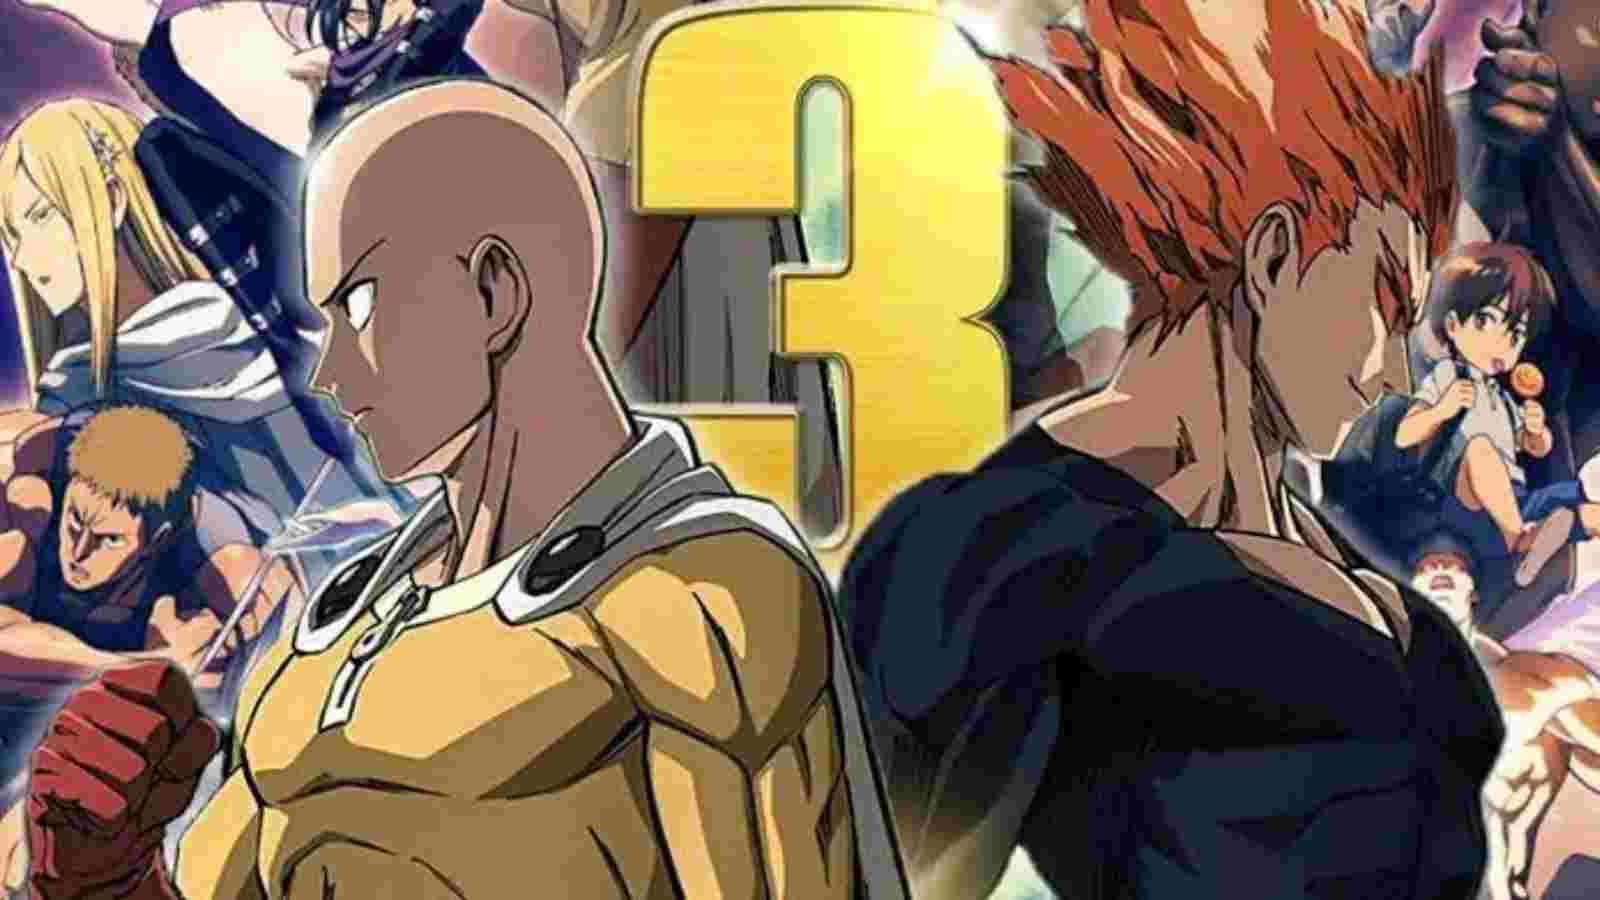 One Punch Man Season 3: Release date, plot details, characters, and more